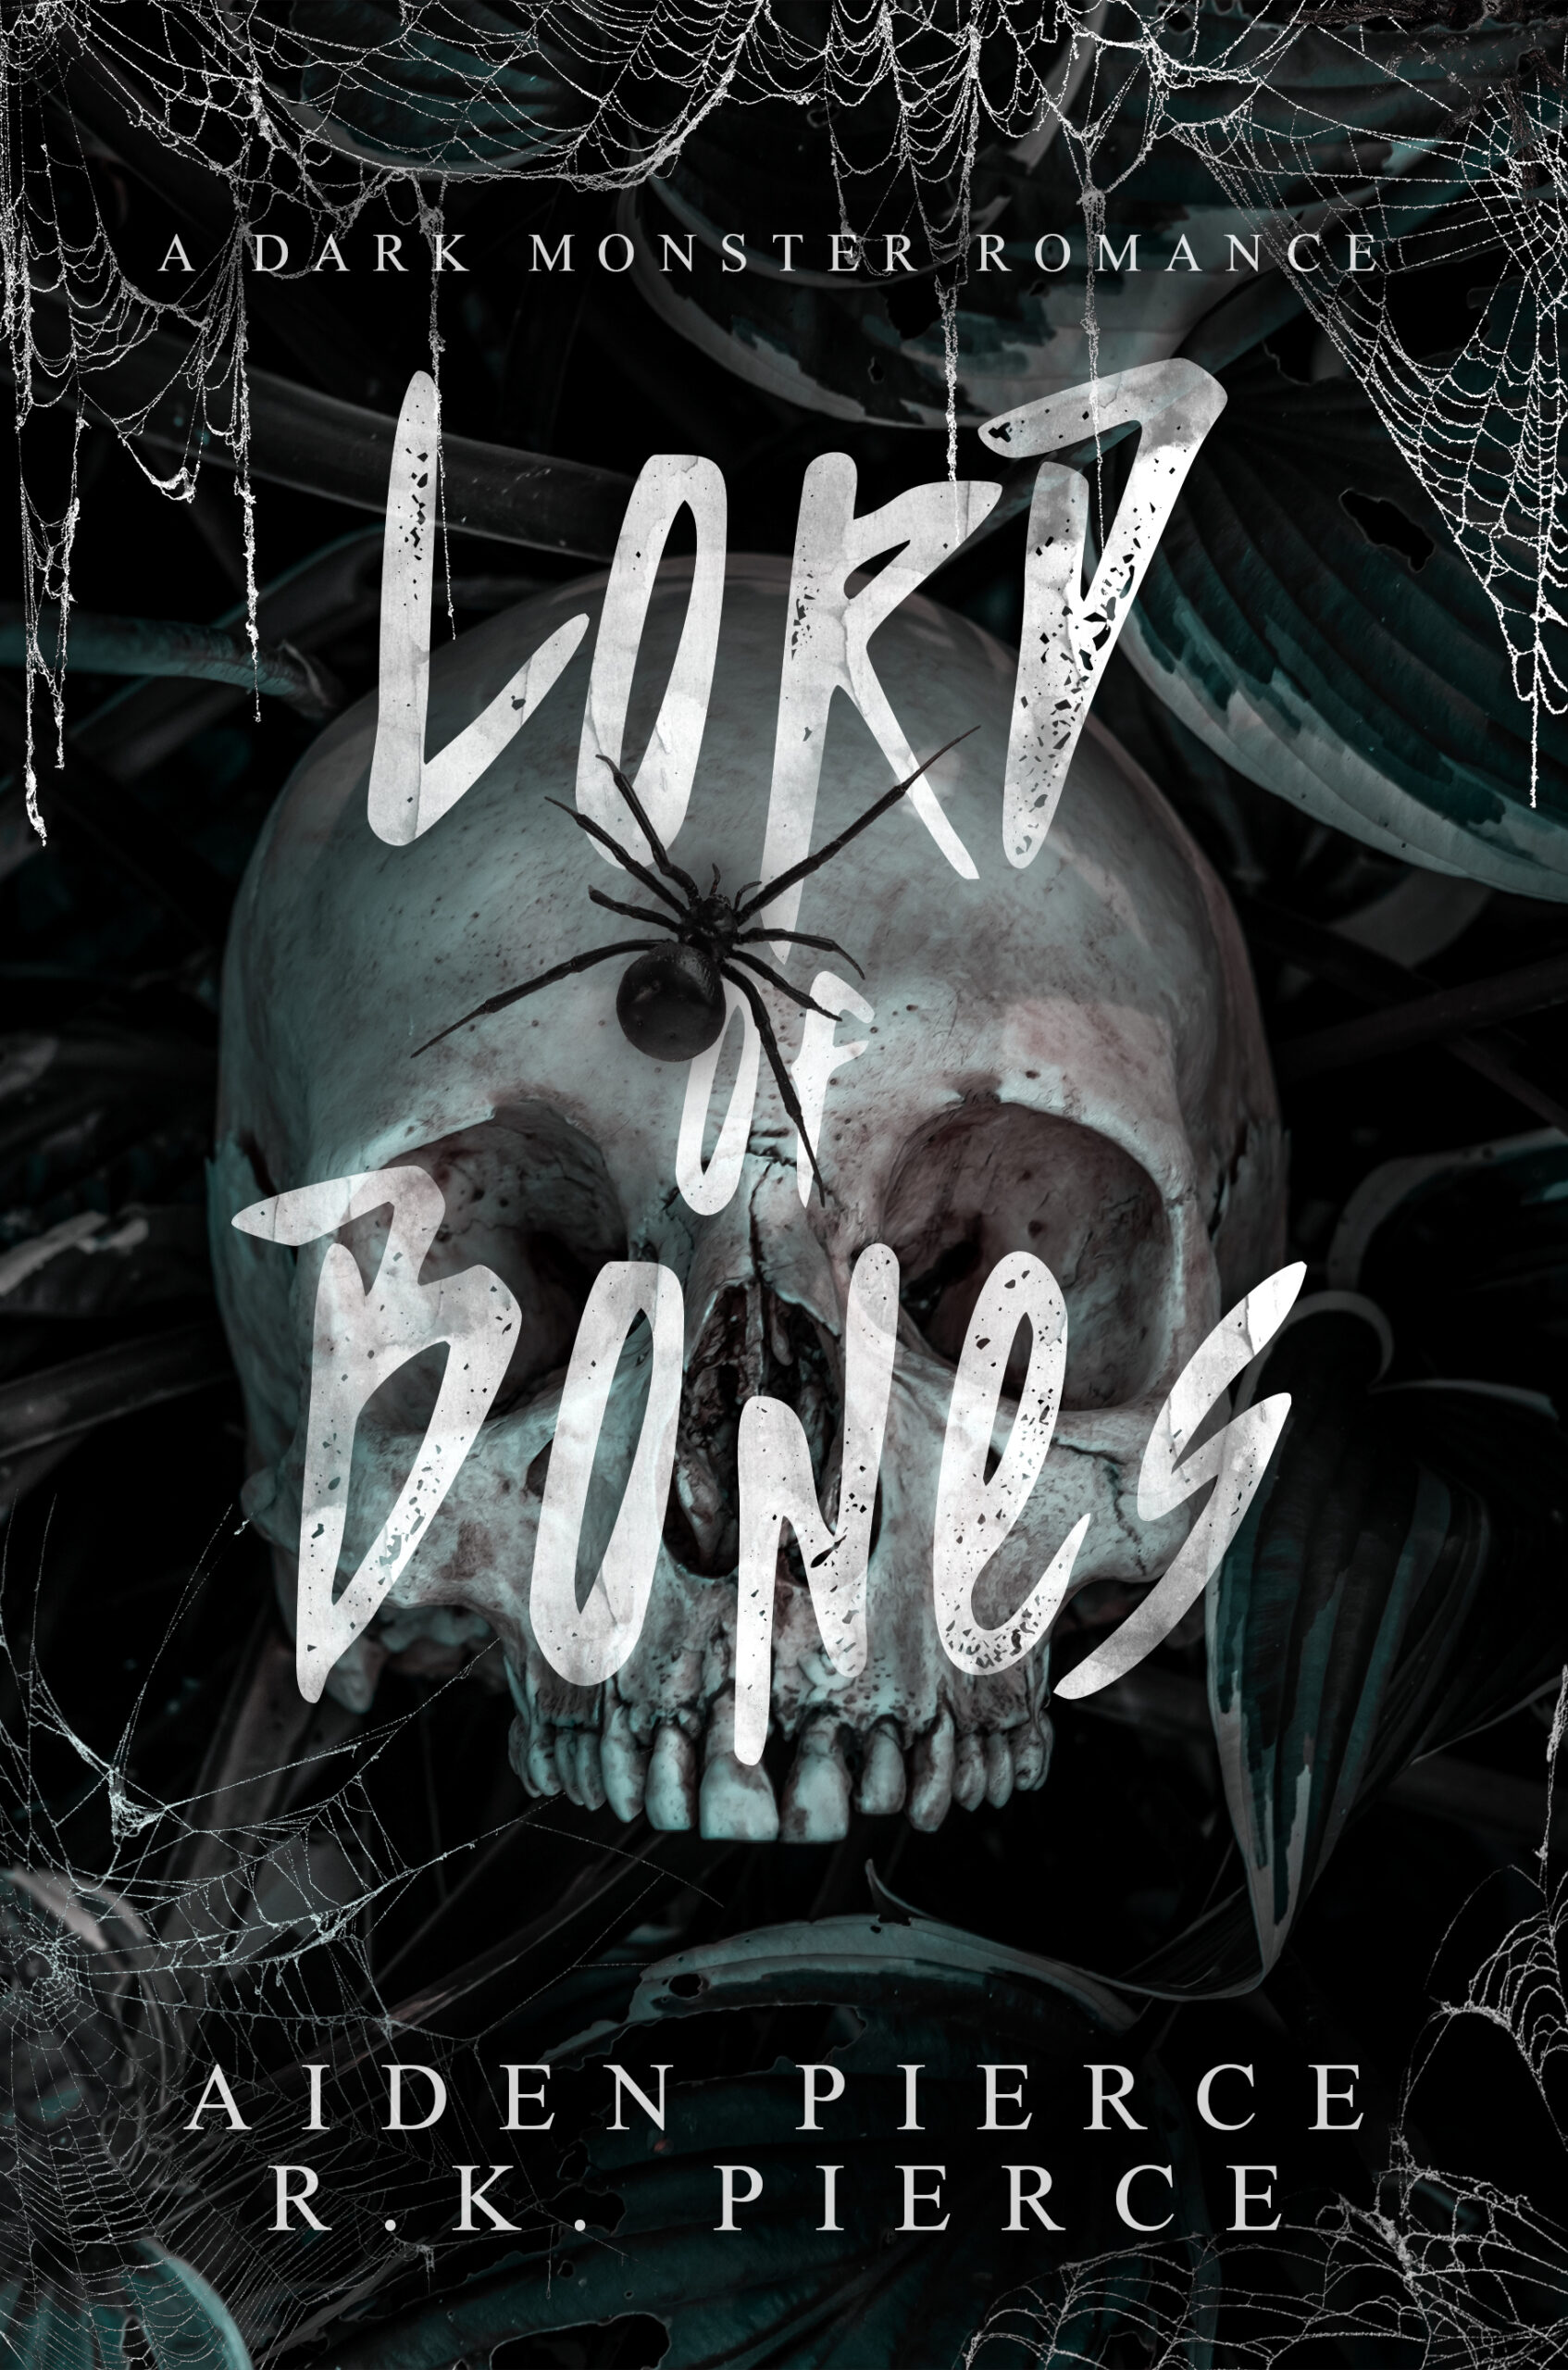 Book Cover: Lord of Bones by Aiden Pierce and R. K. Pierce